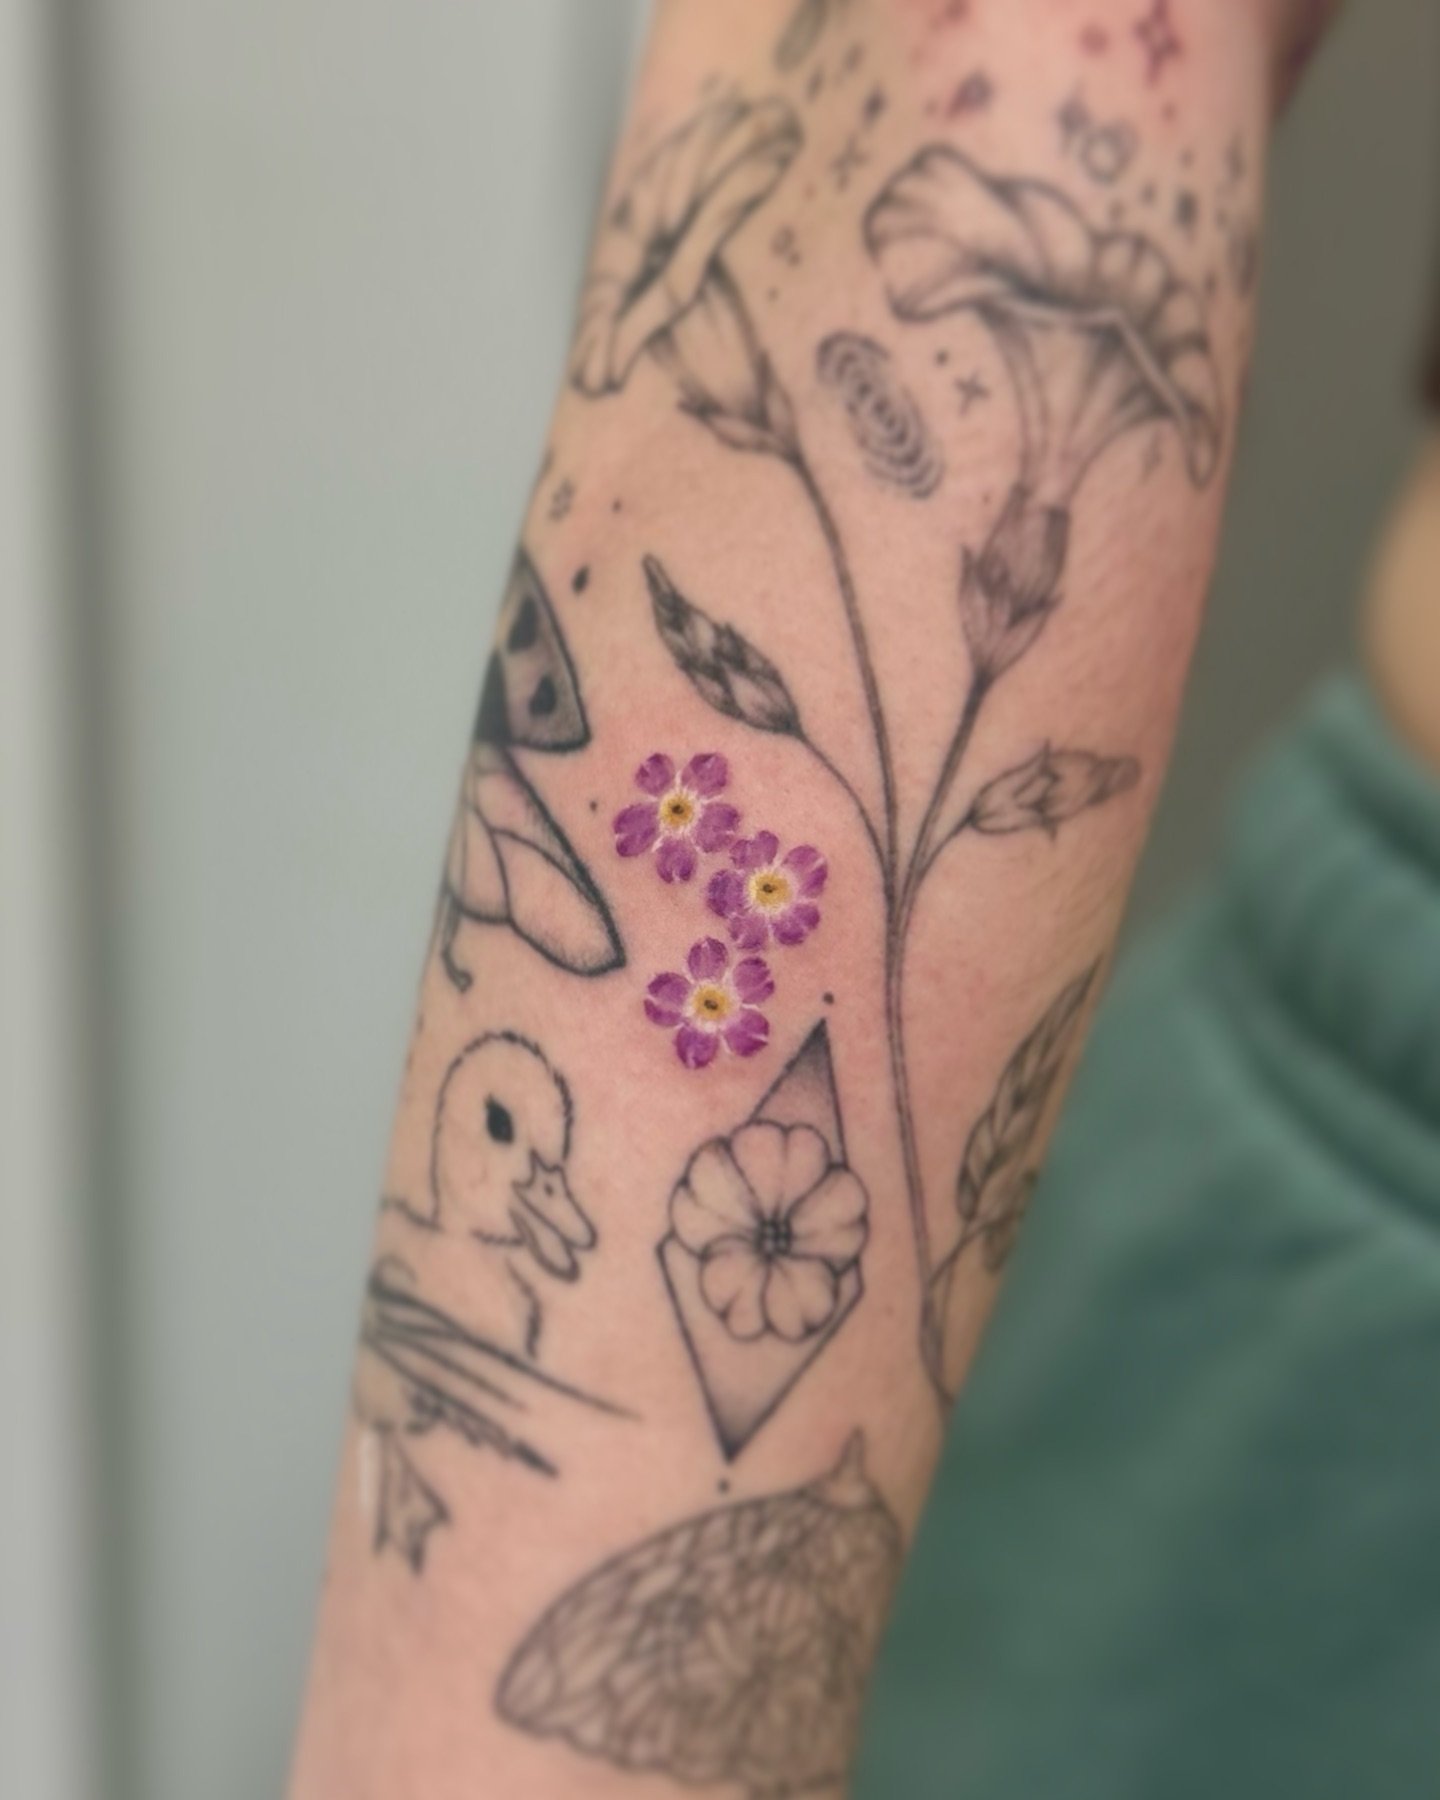 a tiny trio of forget-me-nots. 

the cutest gap filler I&rsquo;ve done so far. 

thanks for coming in again (this is her 7th appt!) 
&amp; trusting me with your first colour piece alexus!